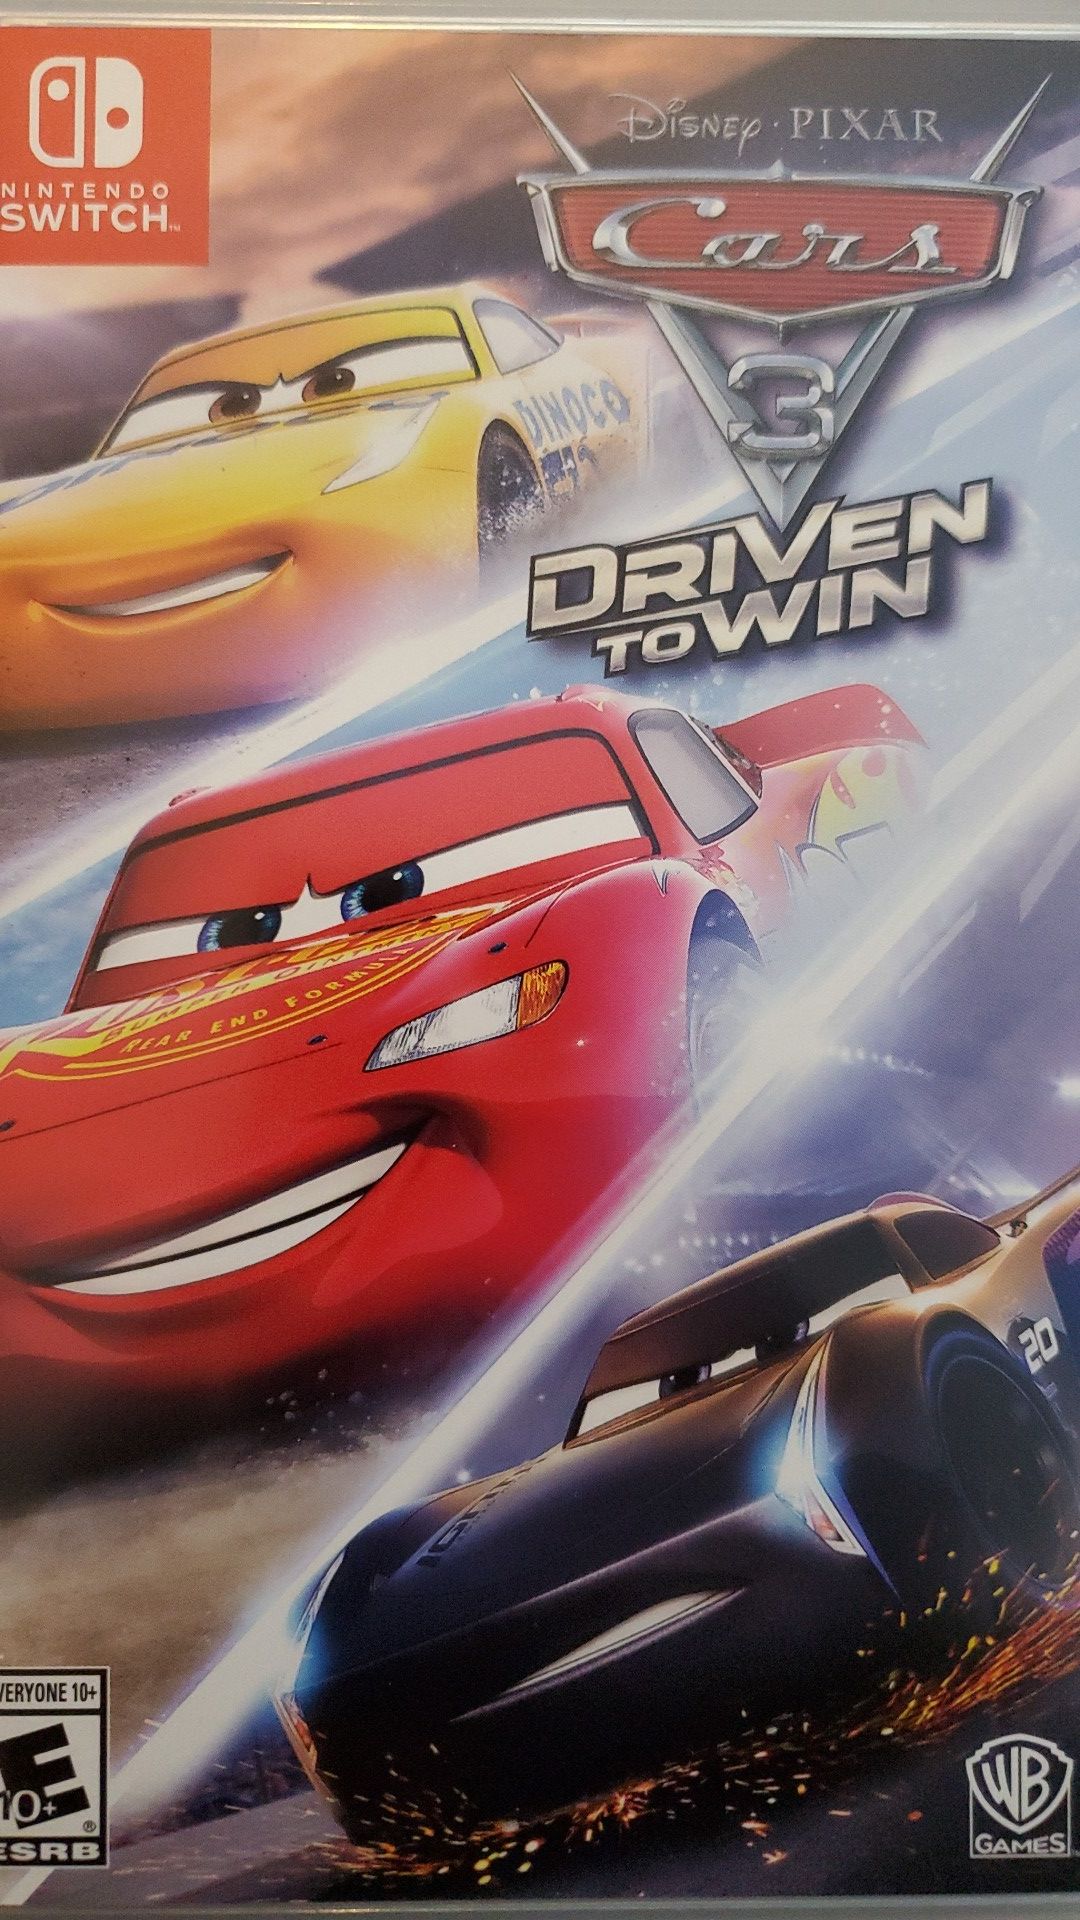 Nintendo Switch Cars 3 Driven to Win